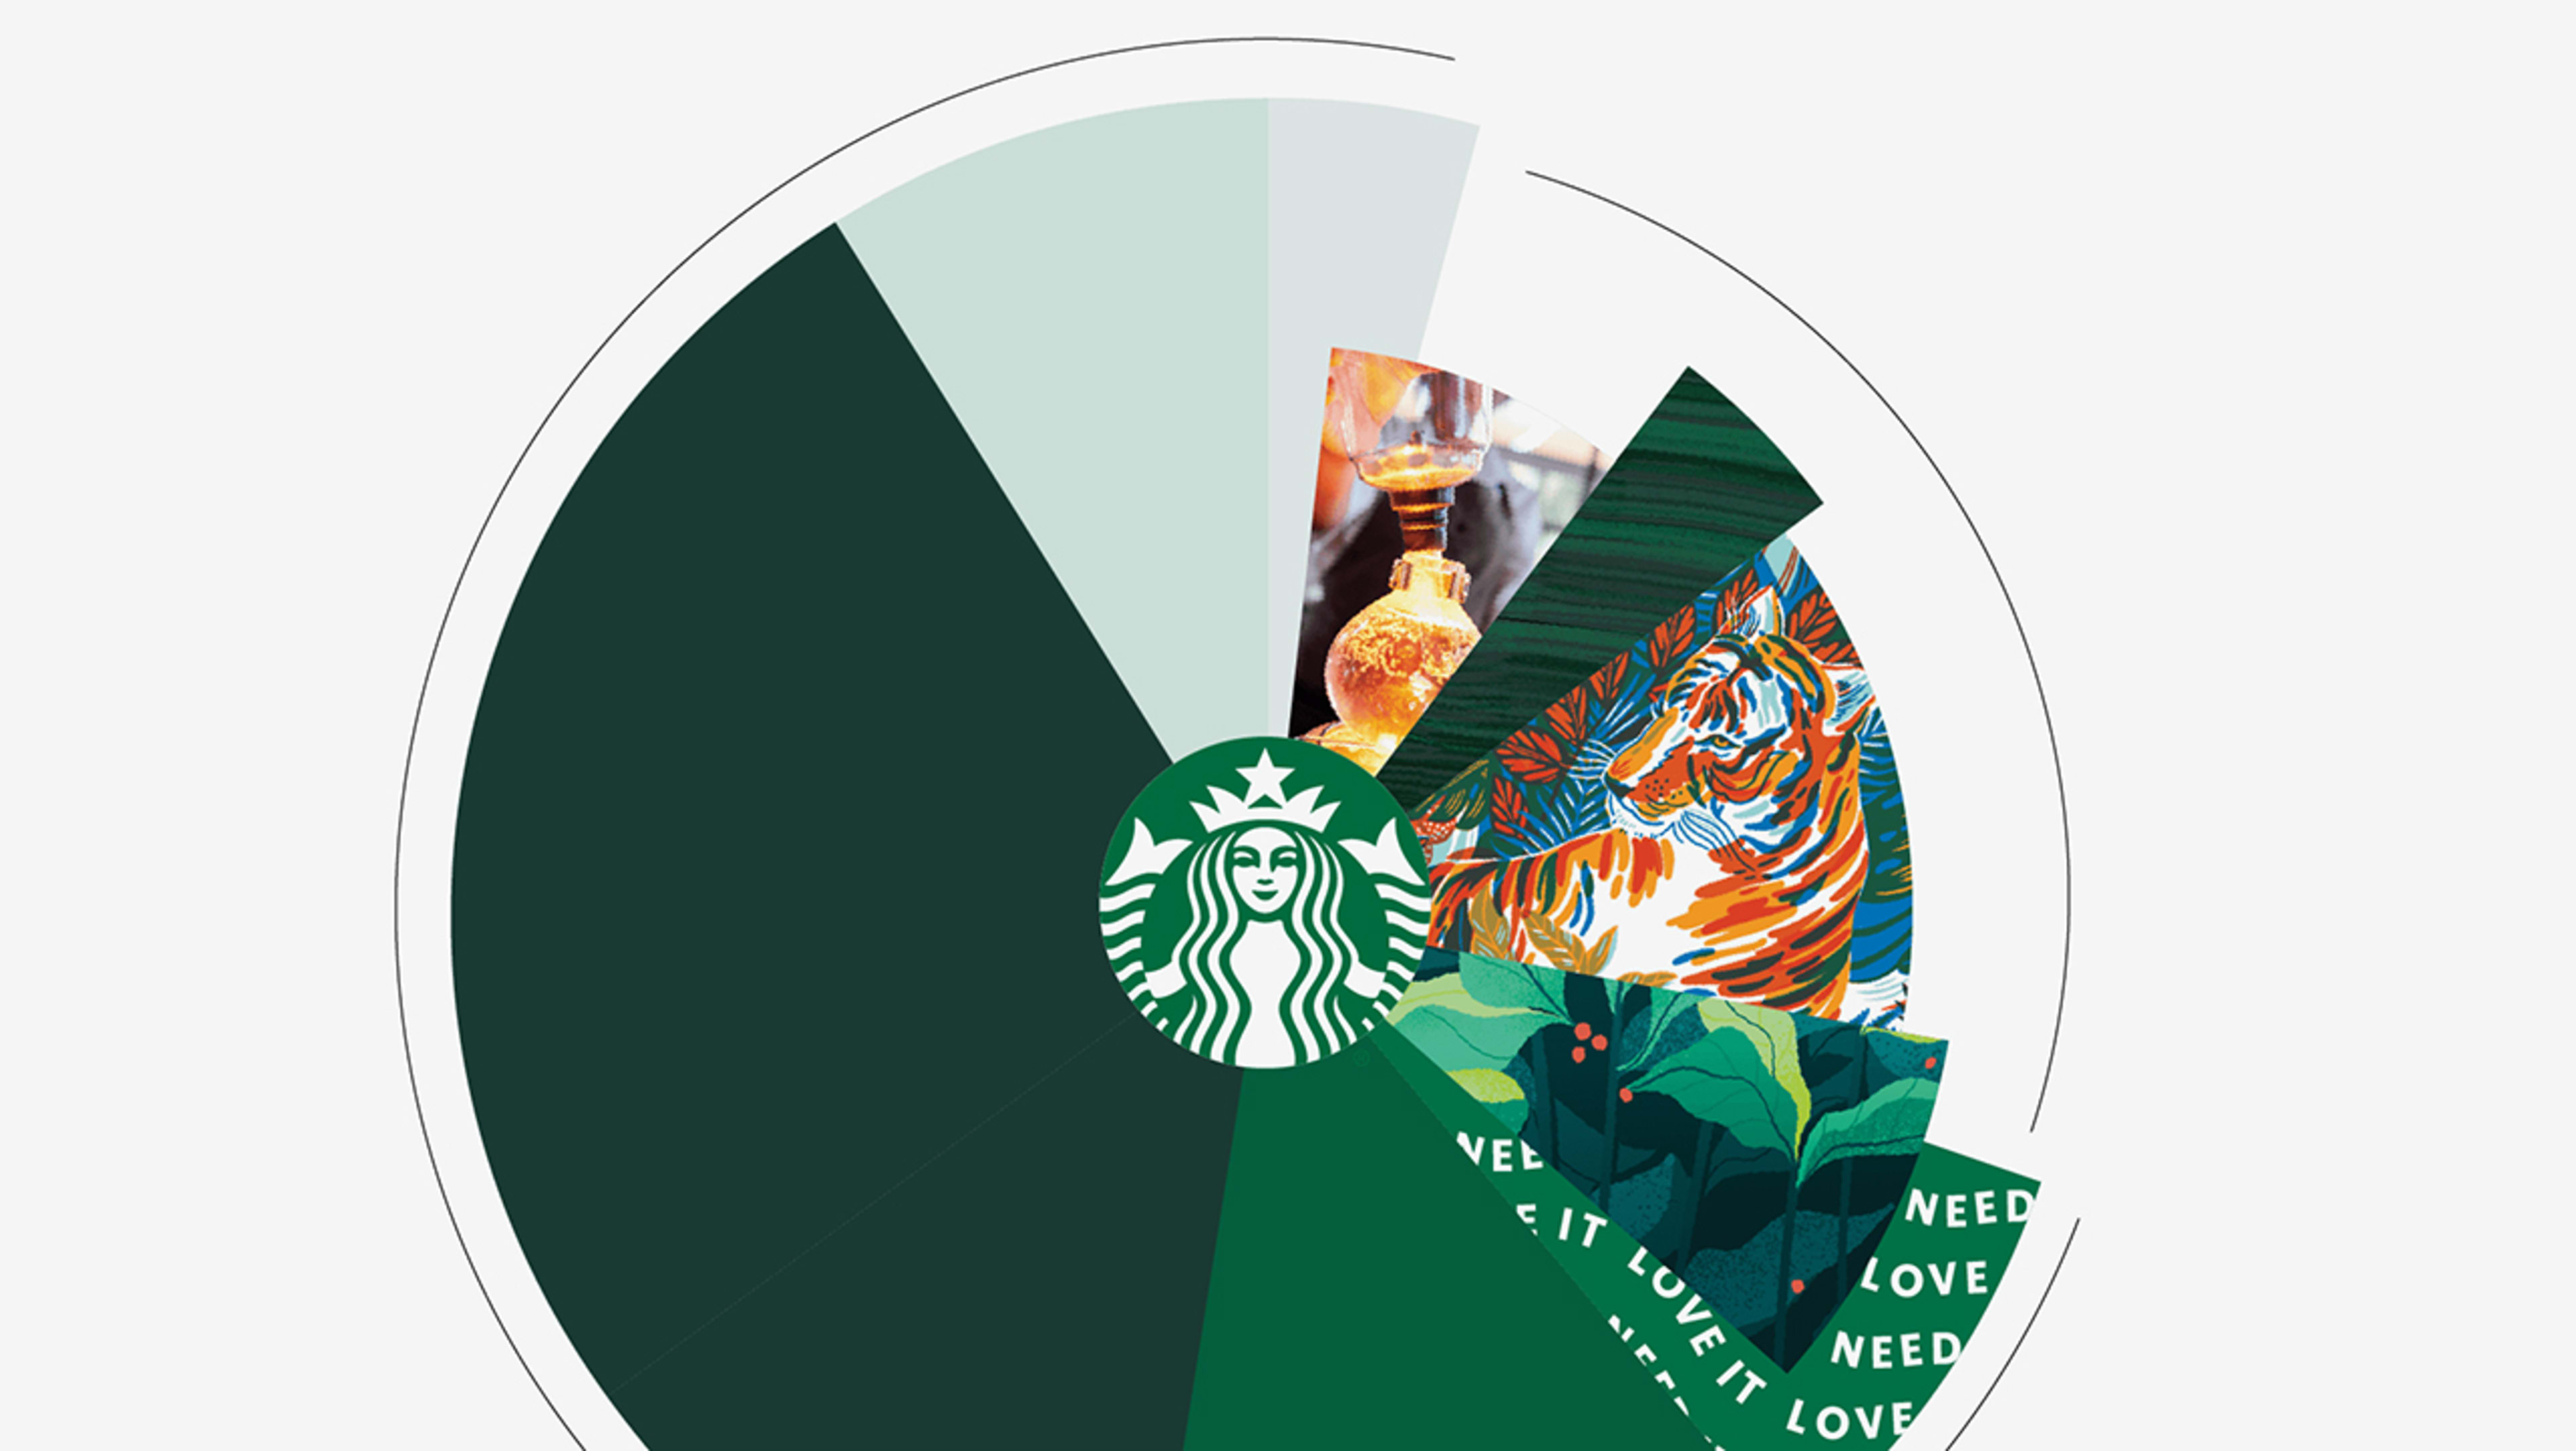 Starbucks just publicly deconstructed its brand—here’s why